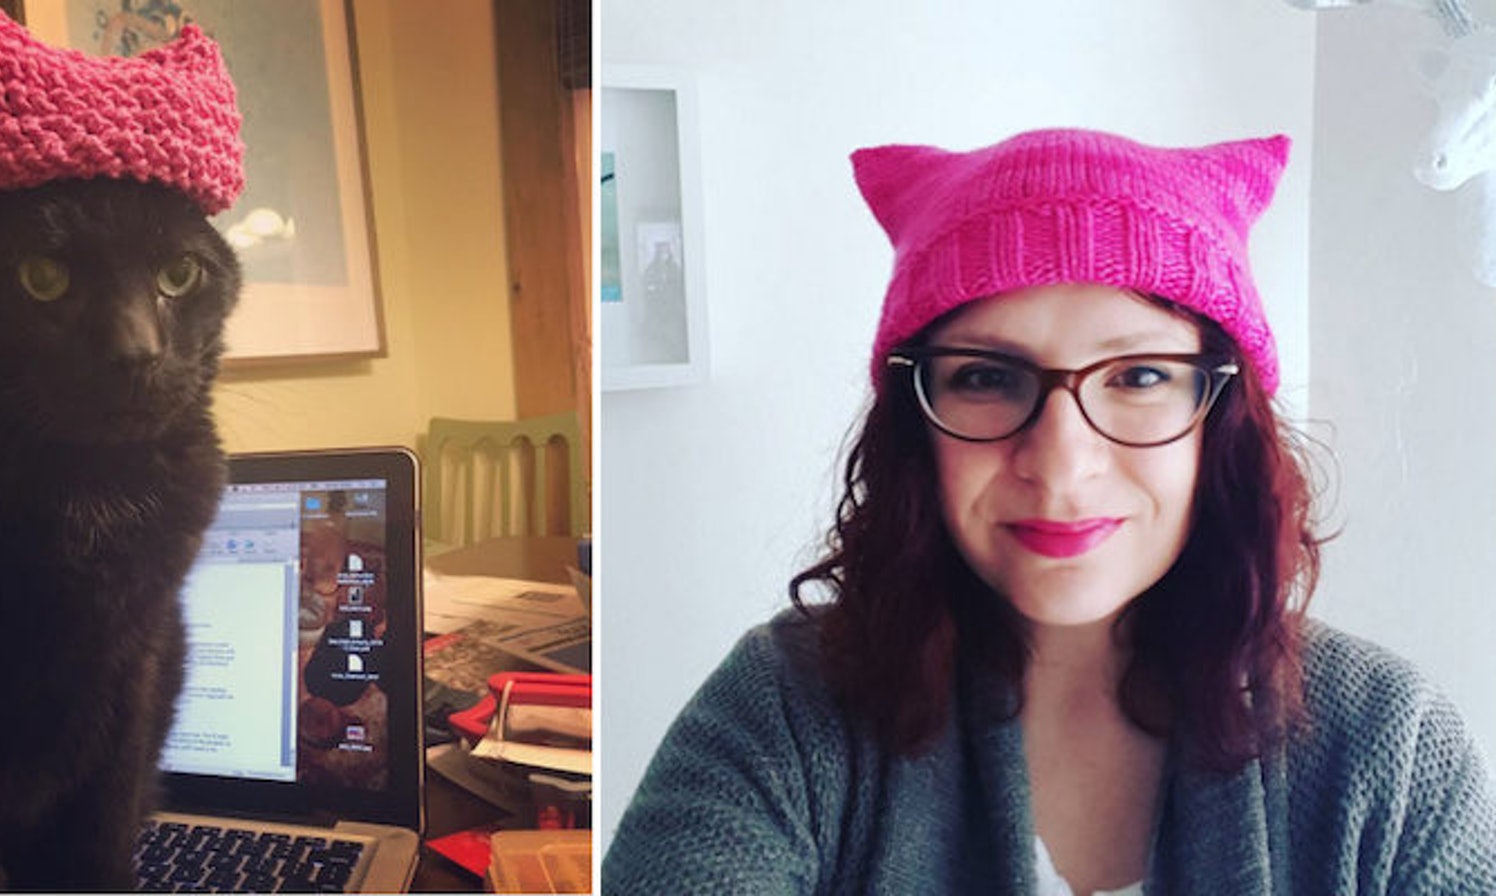 'Pussyhats' Are The Fashion Choice Of Women's March On DC